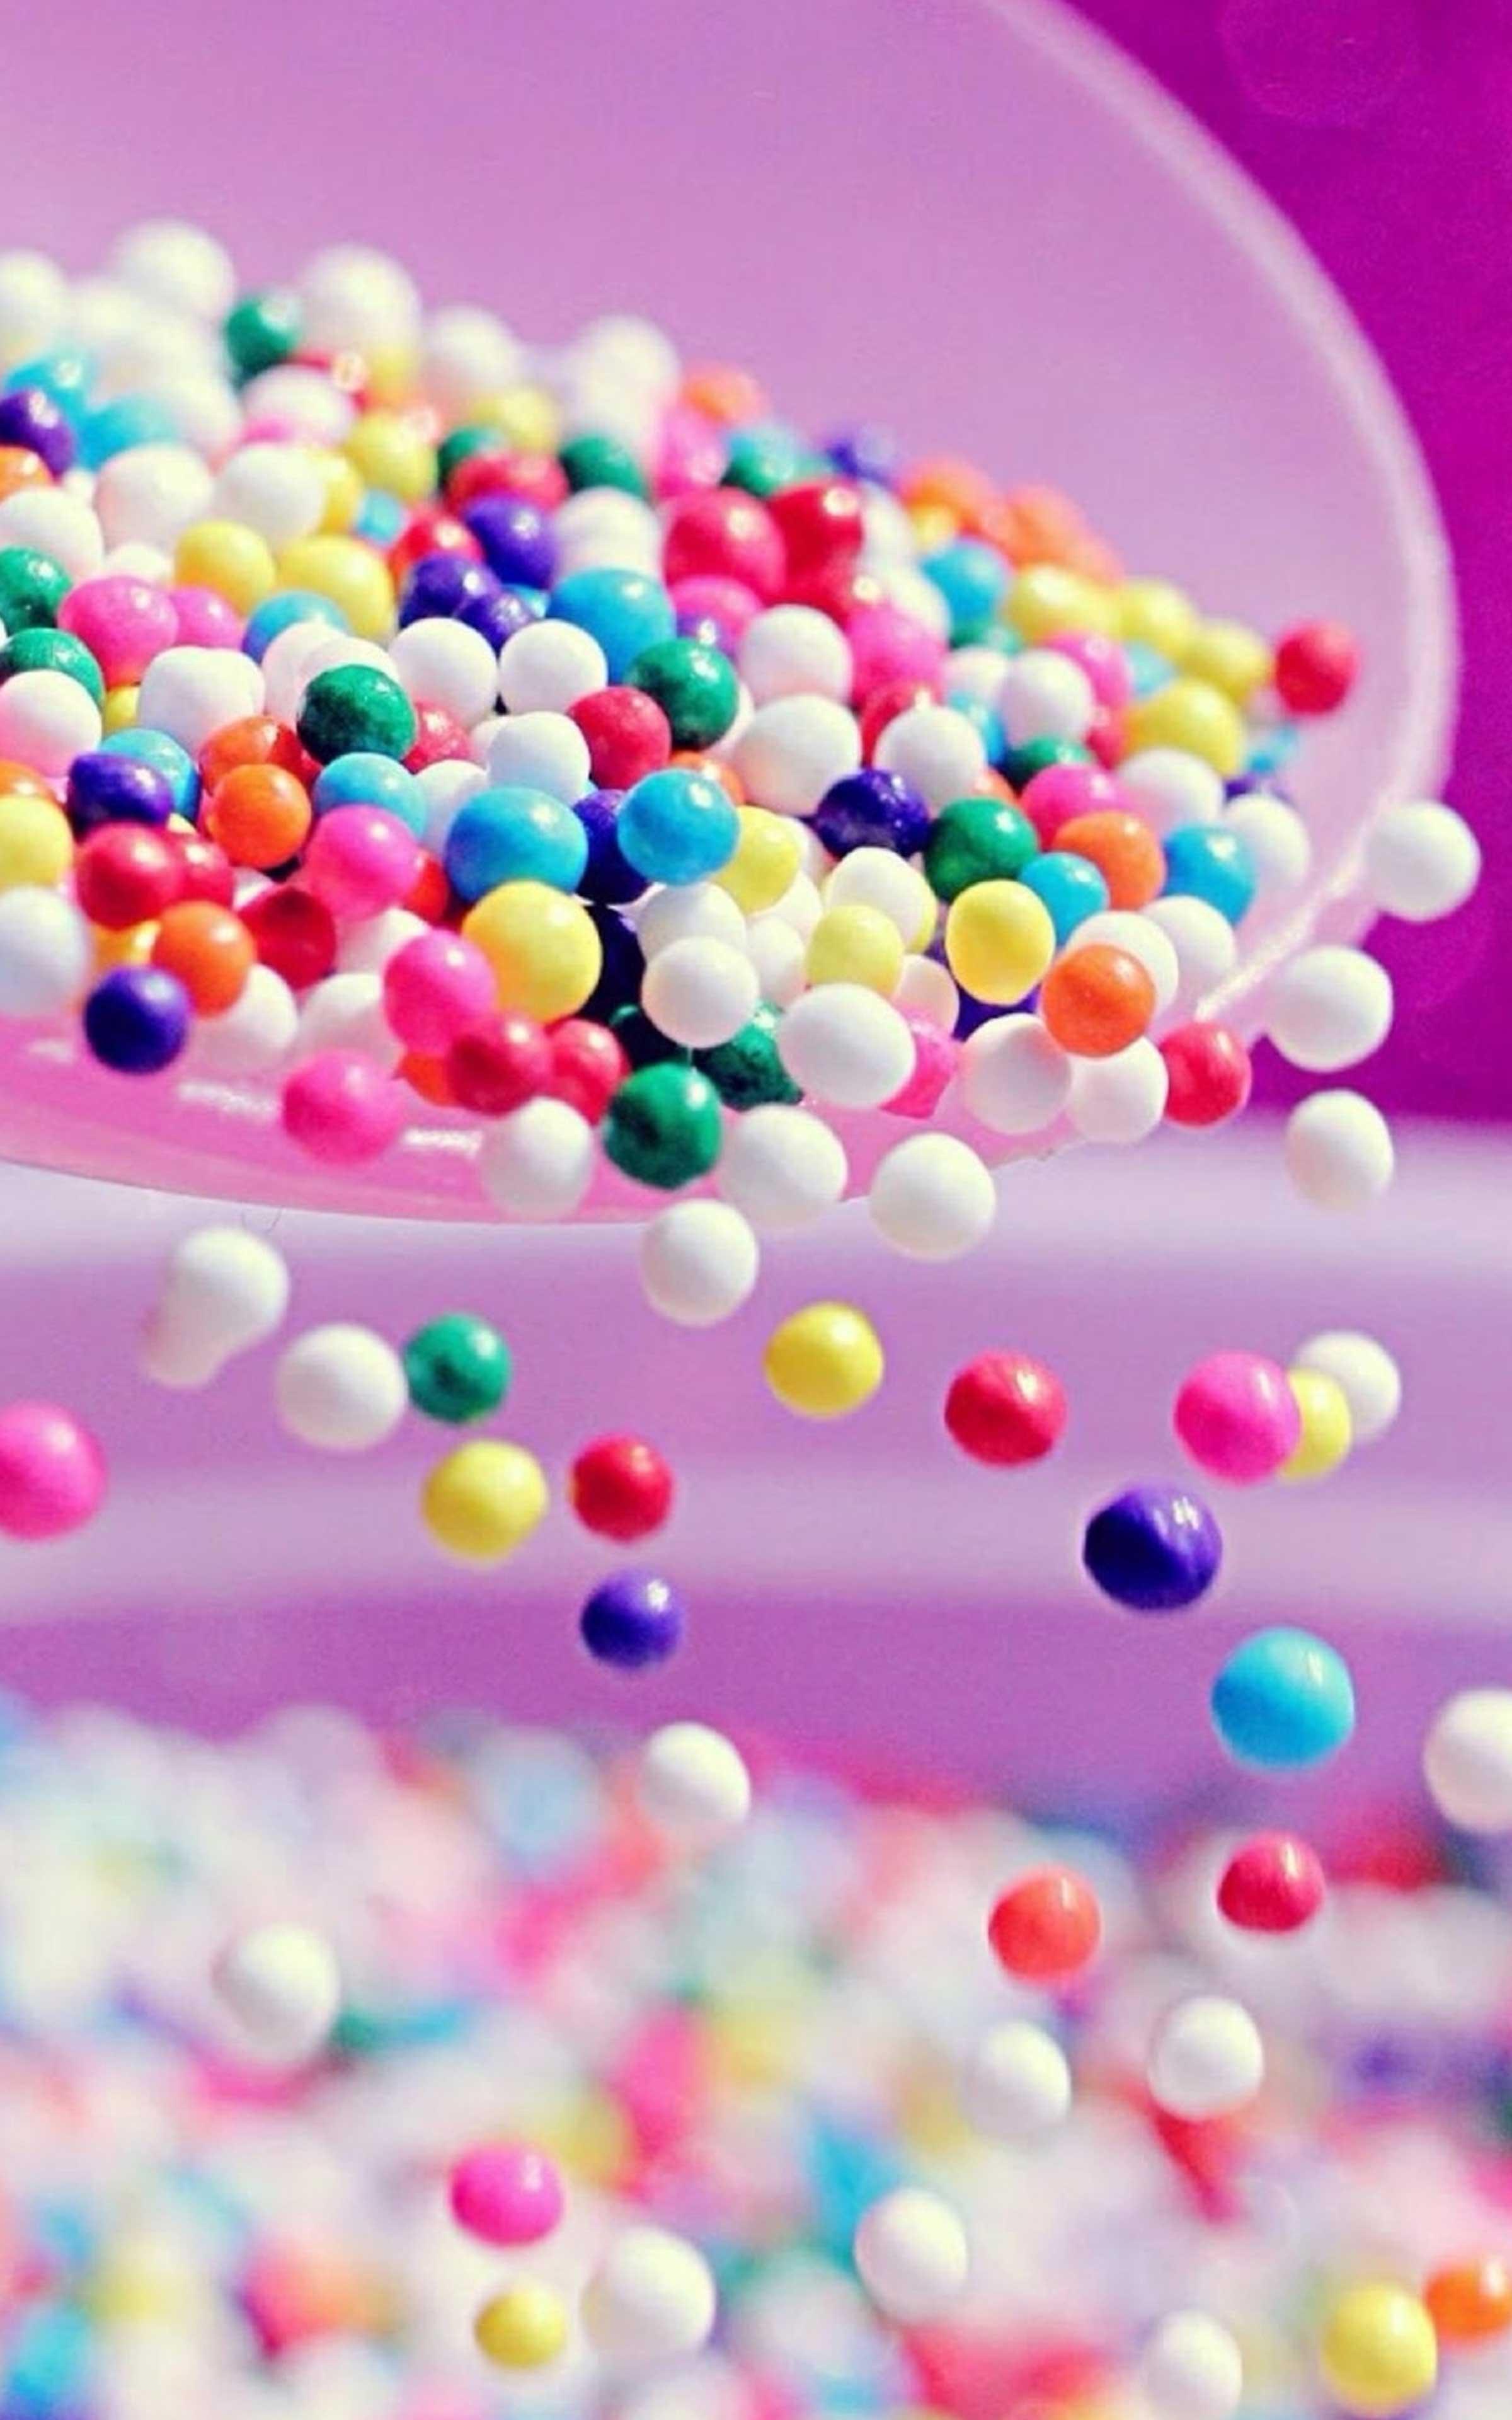 Candy Wallpaper Best Cool Image For Android